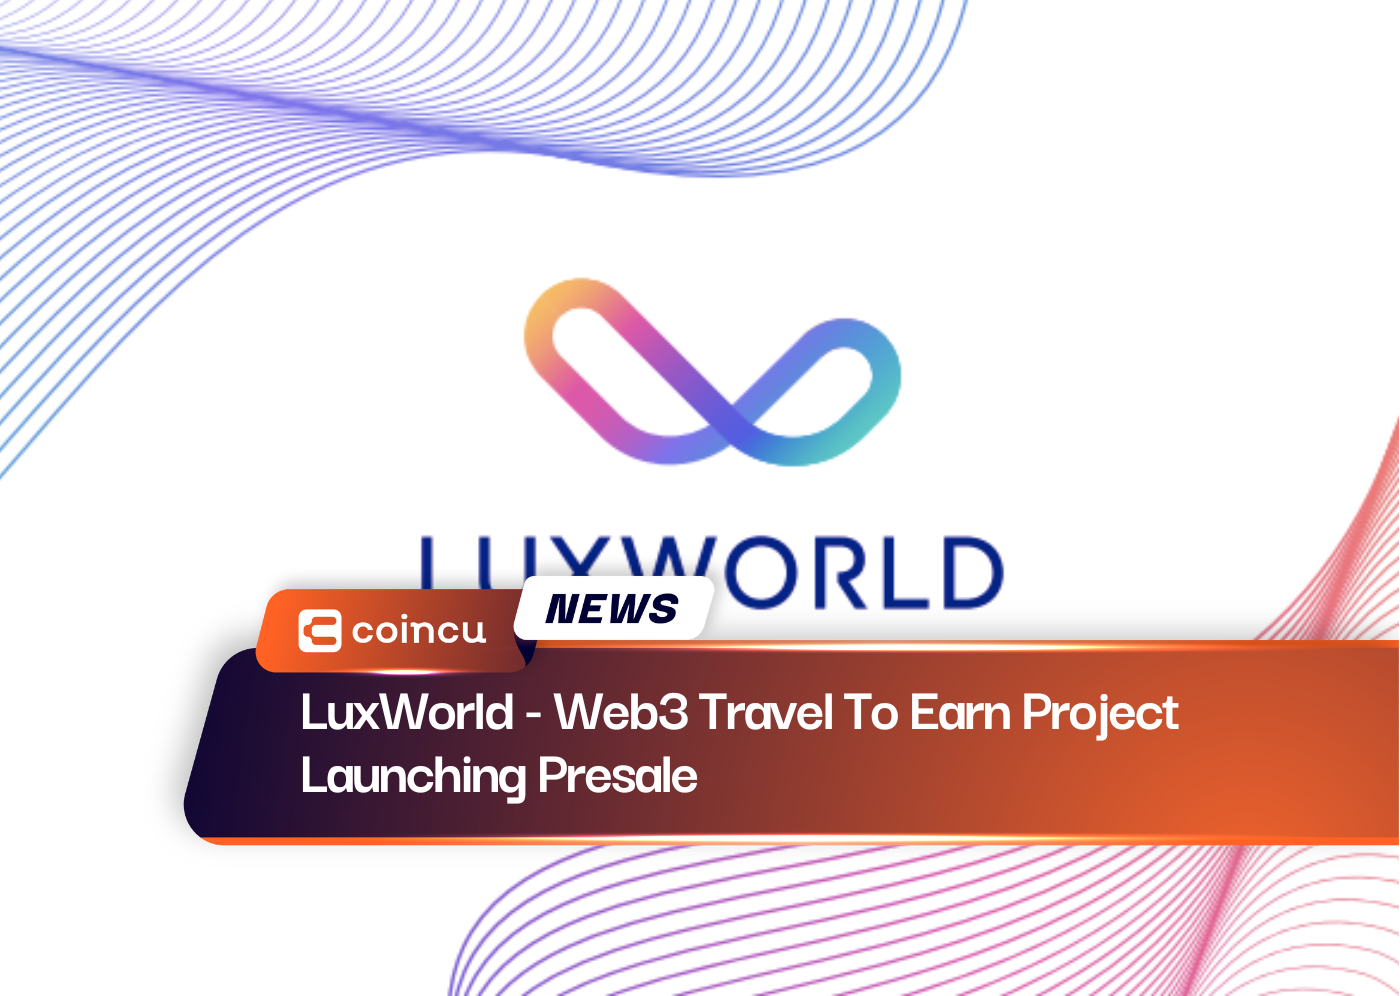 LuxWorld - Web3 Travel To Earn Project Launching Presale